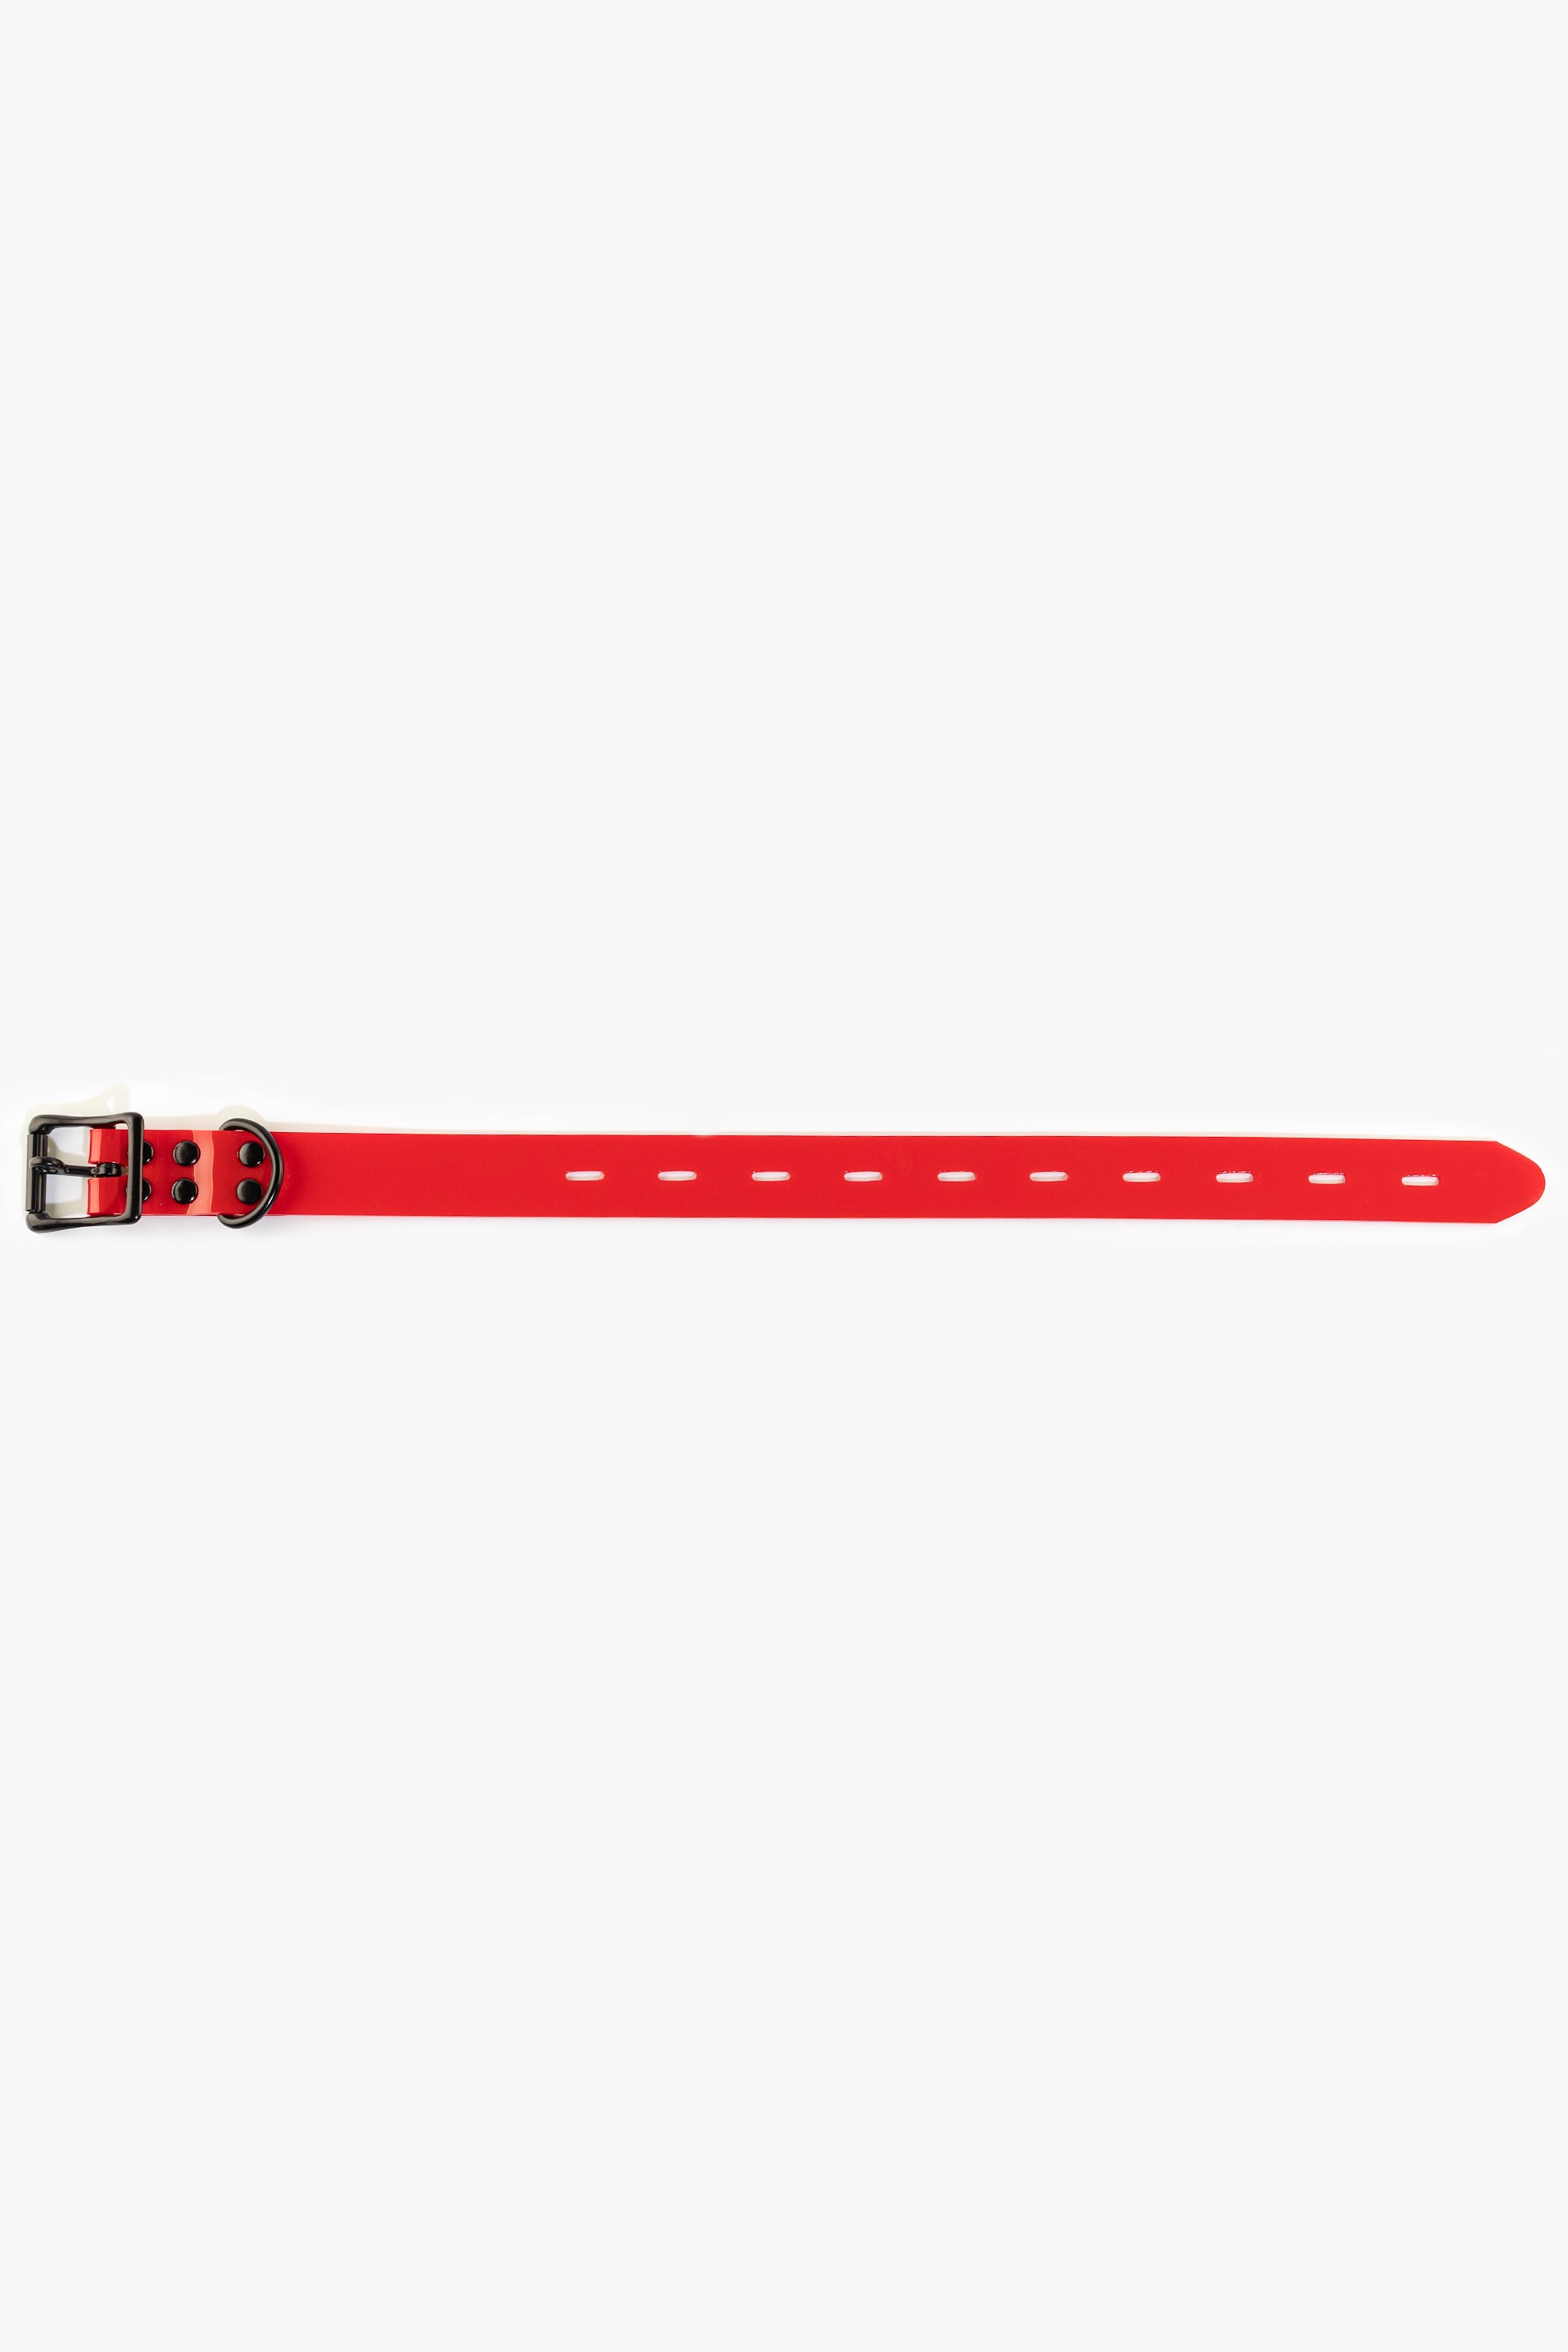 Bondage PVC strap with lockable buckle 25 mm, different lengths, red/black